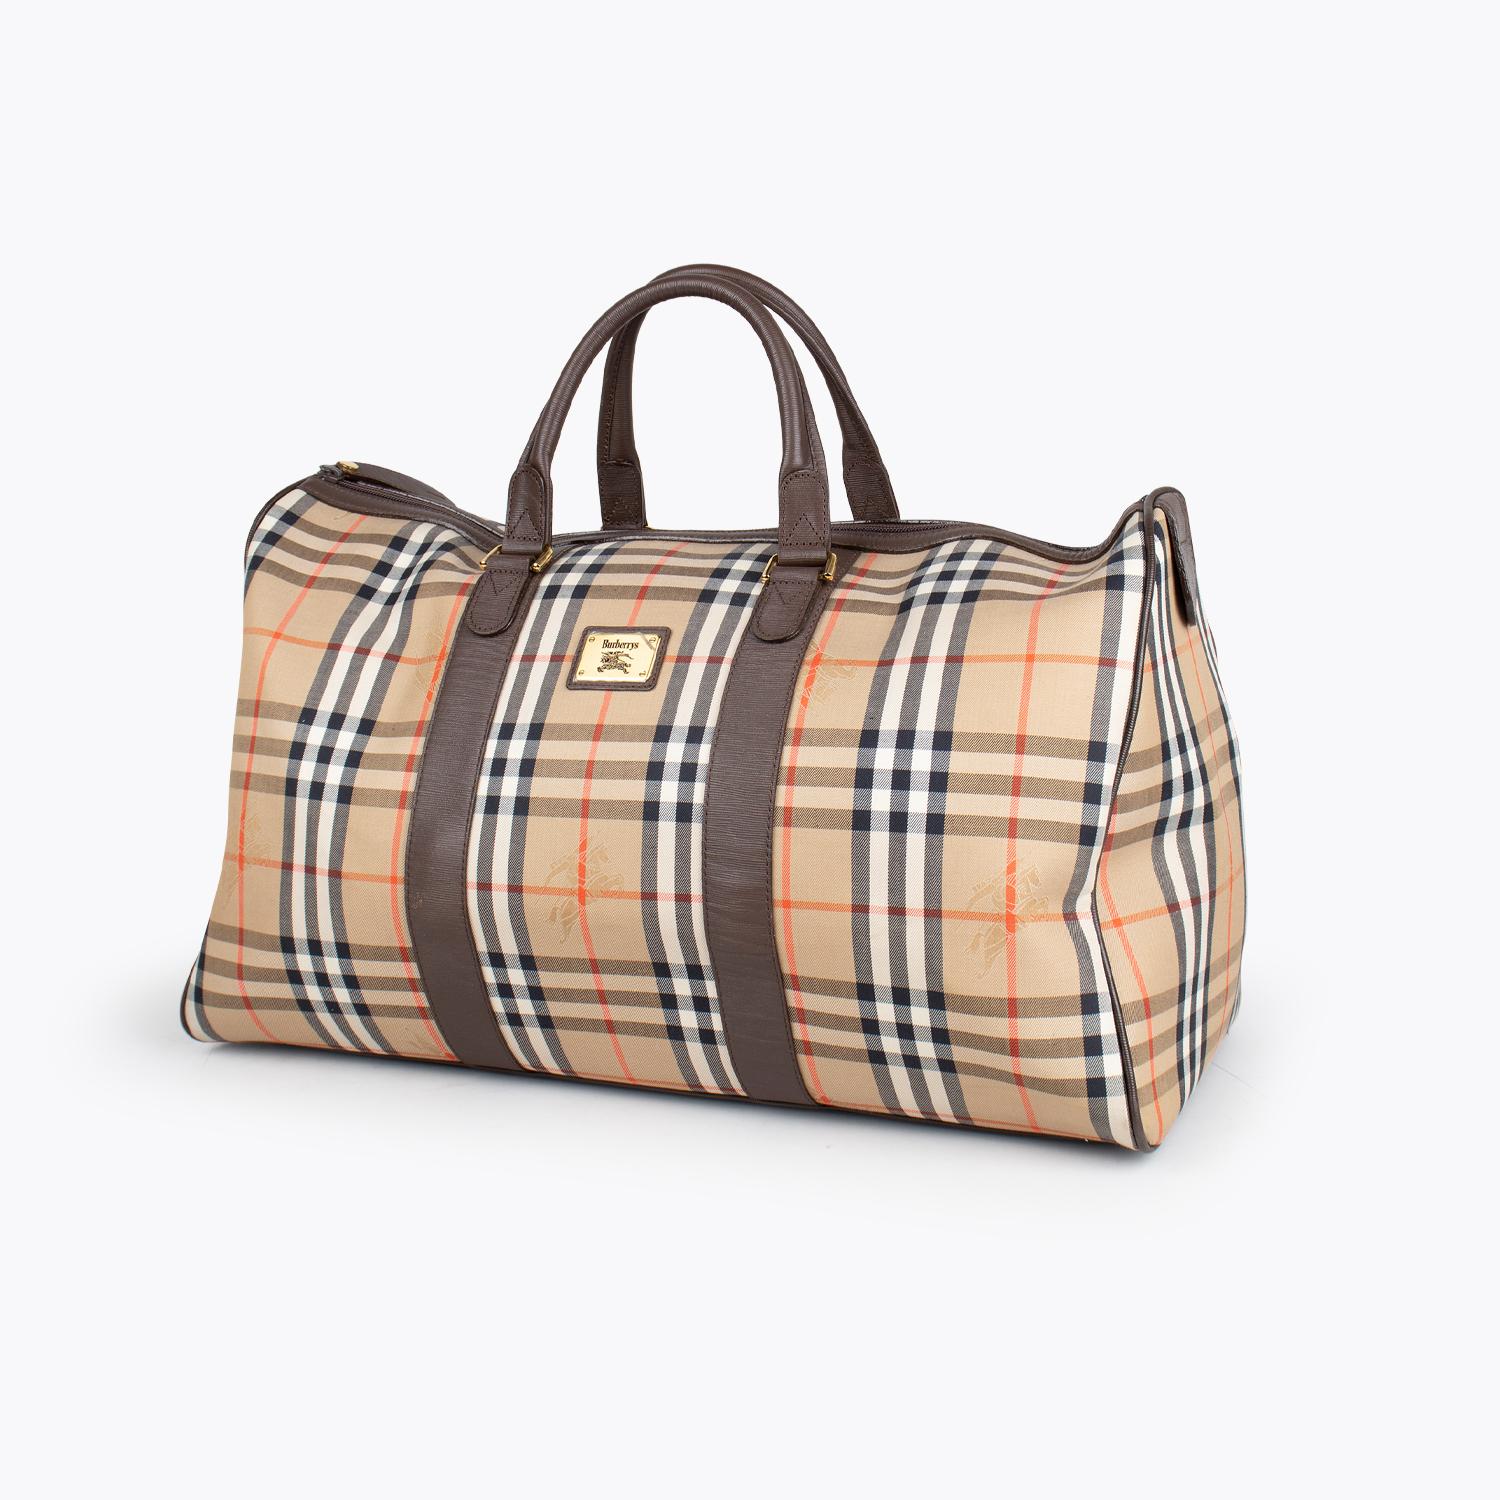 Tan and multicolor Haymarket check coated canvas Burberry duffle bag with

- Gold-tone hardware
- Brown leather trim
- Protective feet at base
- Dual rolled top handles, brown canvas lining, single pocket with zip closure at interior wall and zip